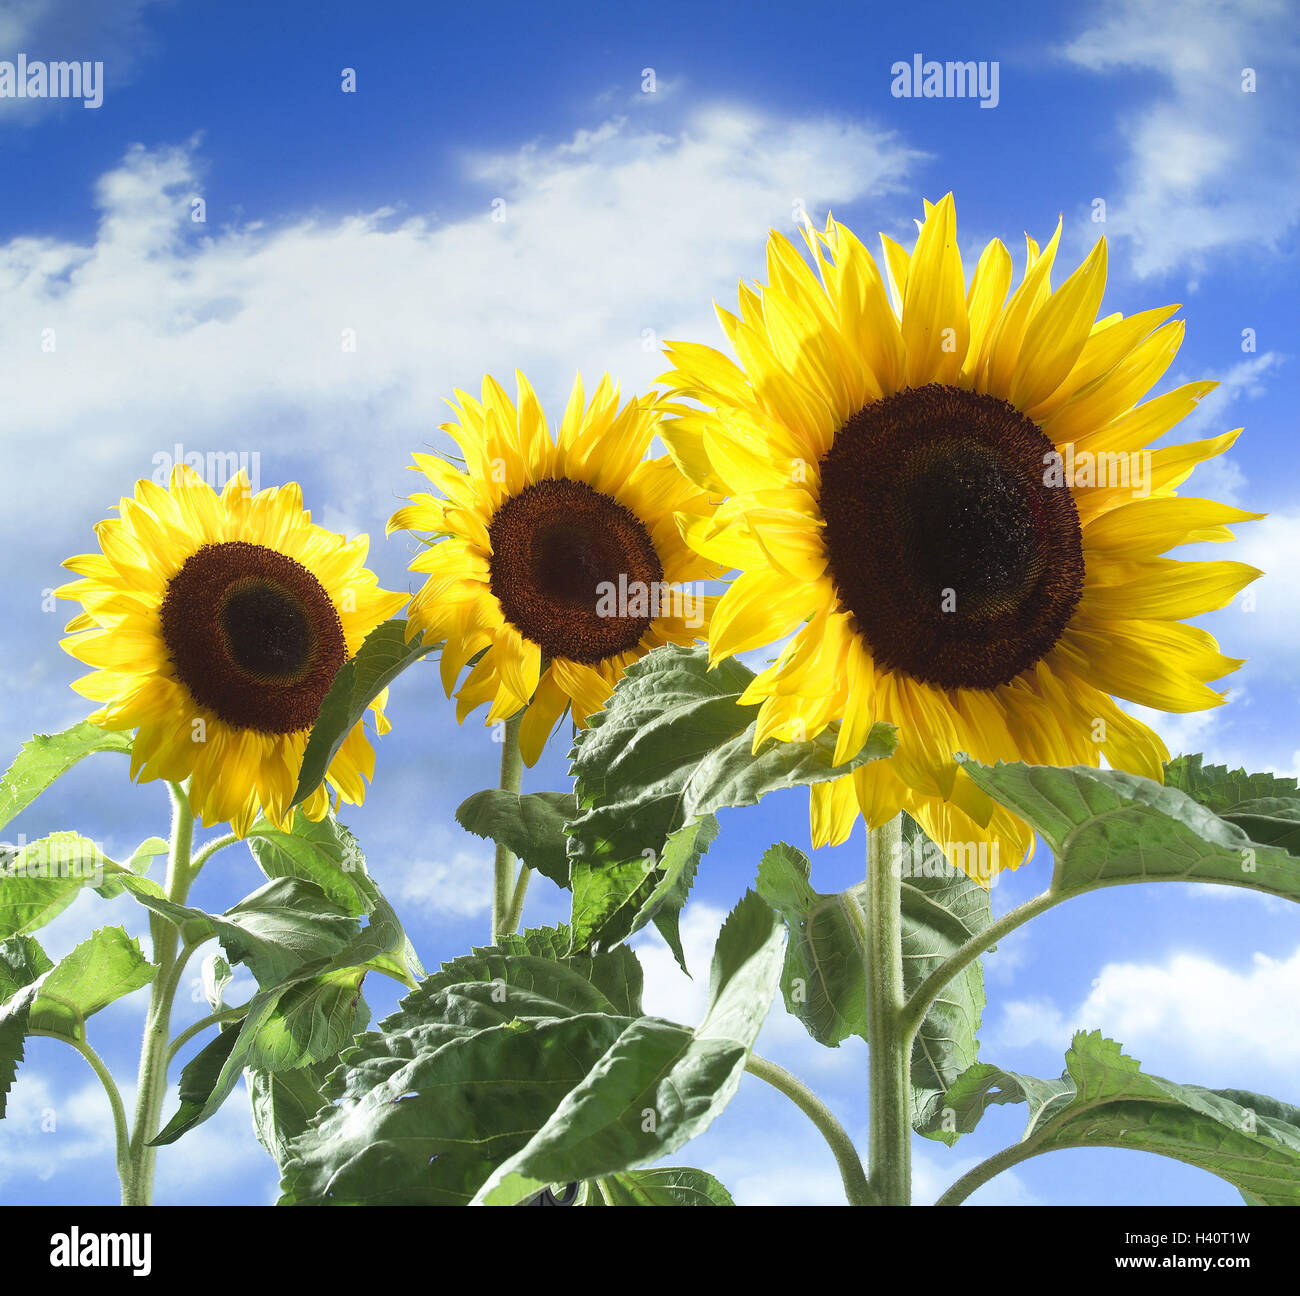 cloudy sky, sunflowers, detail, plants, plant world, vegetation, botany, nature, useful plants, flowers, three, Helianthus annuus, composites, blossom, blossoms, flower heads, sunny, heaven, clouds, Composing Stock Photo